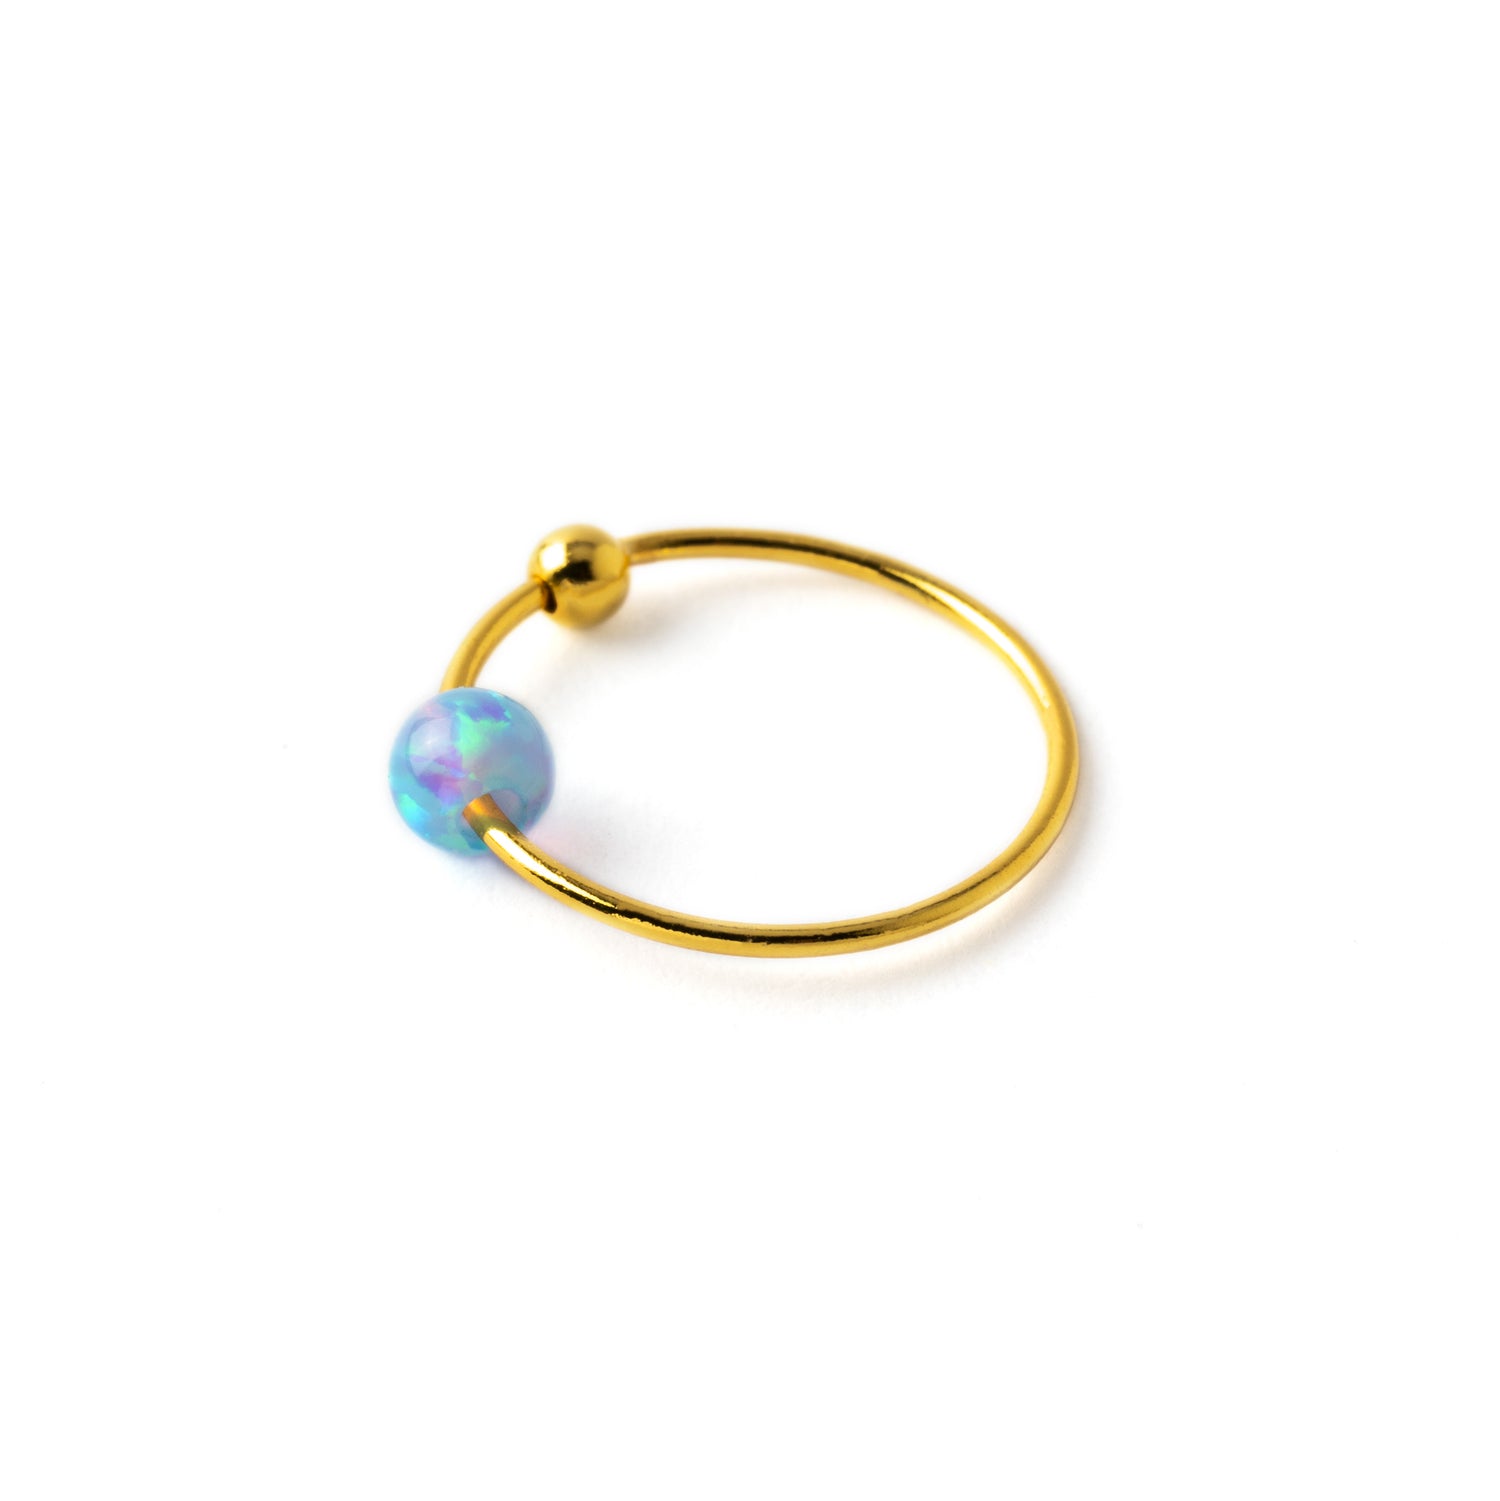 18k Gold nose ring with blue Opal bead right side view